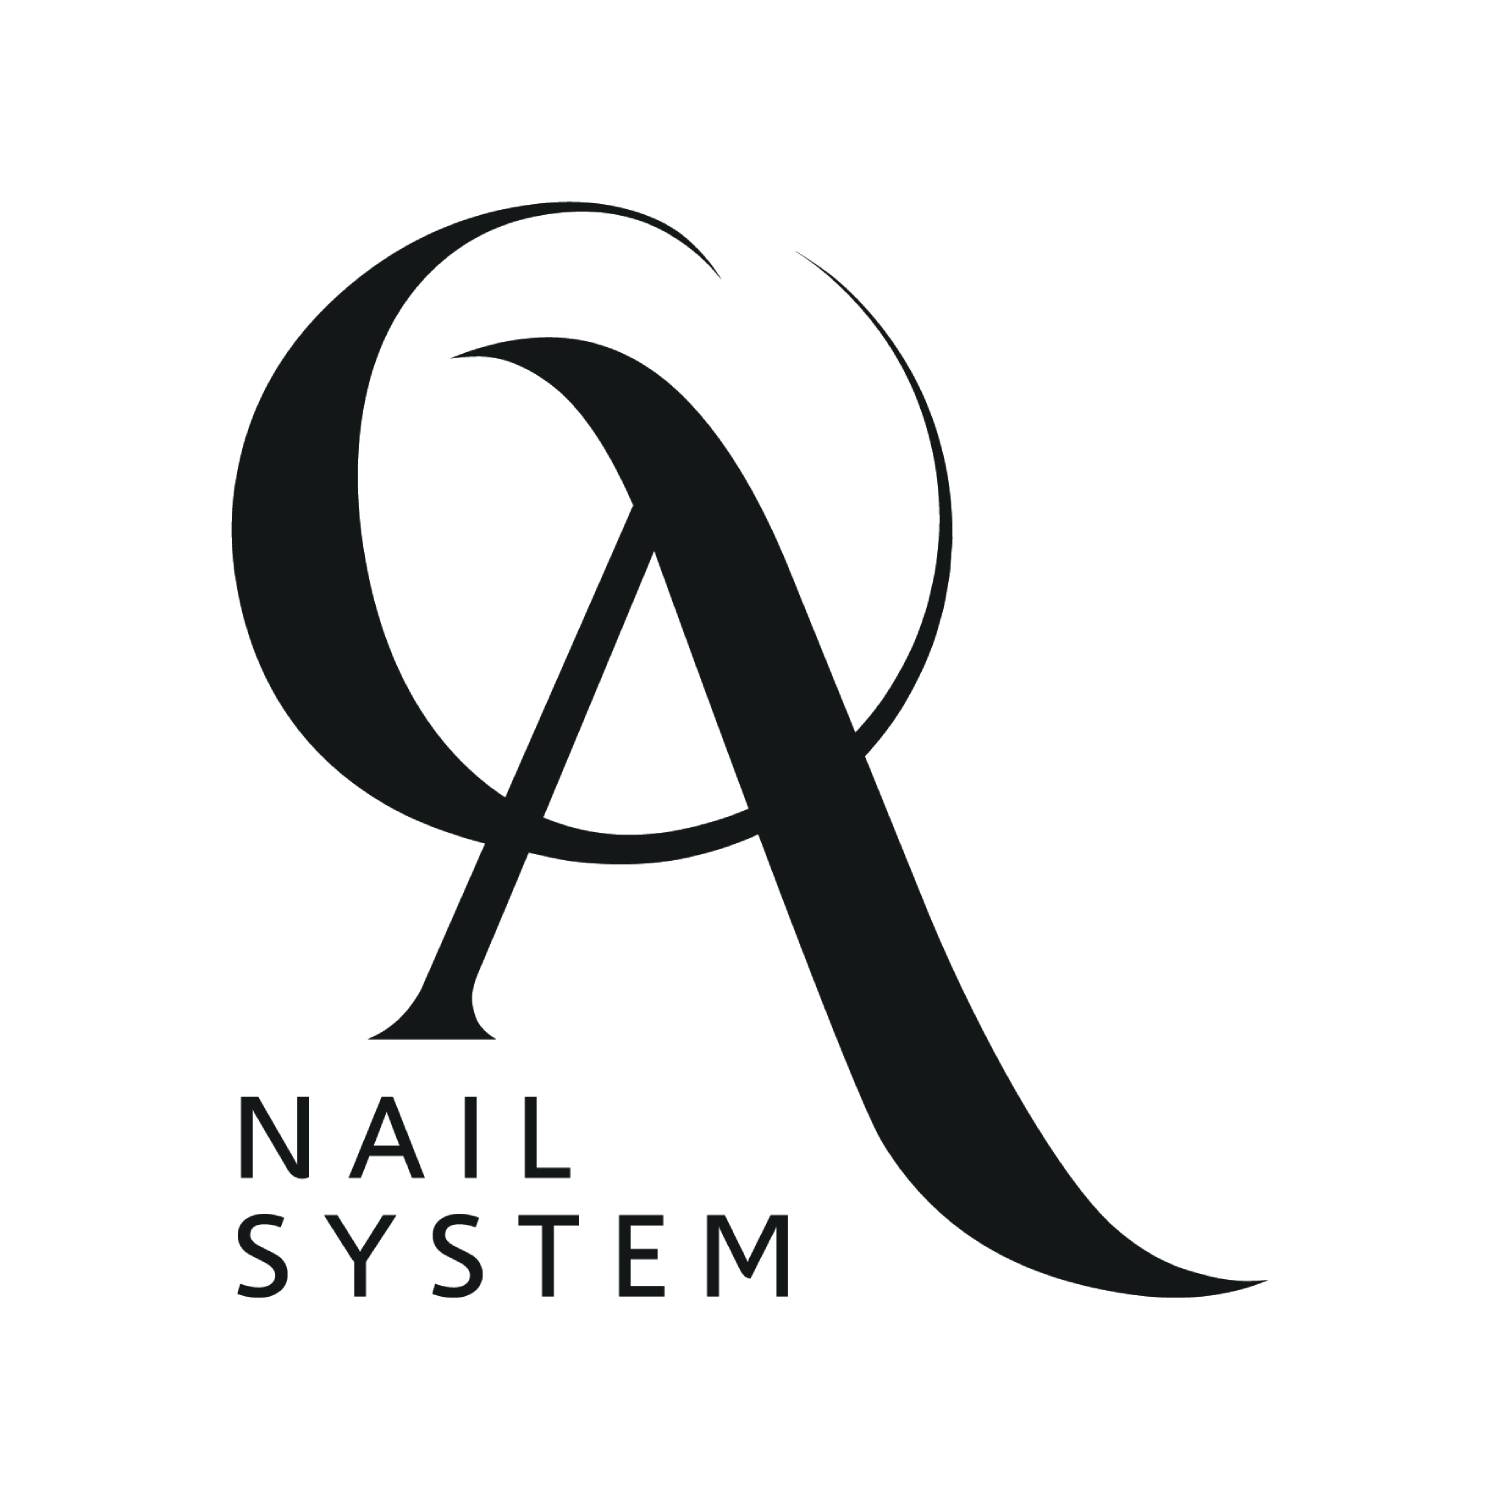 OA Nail System - Gel Couleur Nude